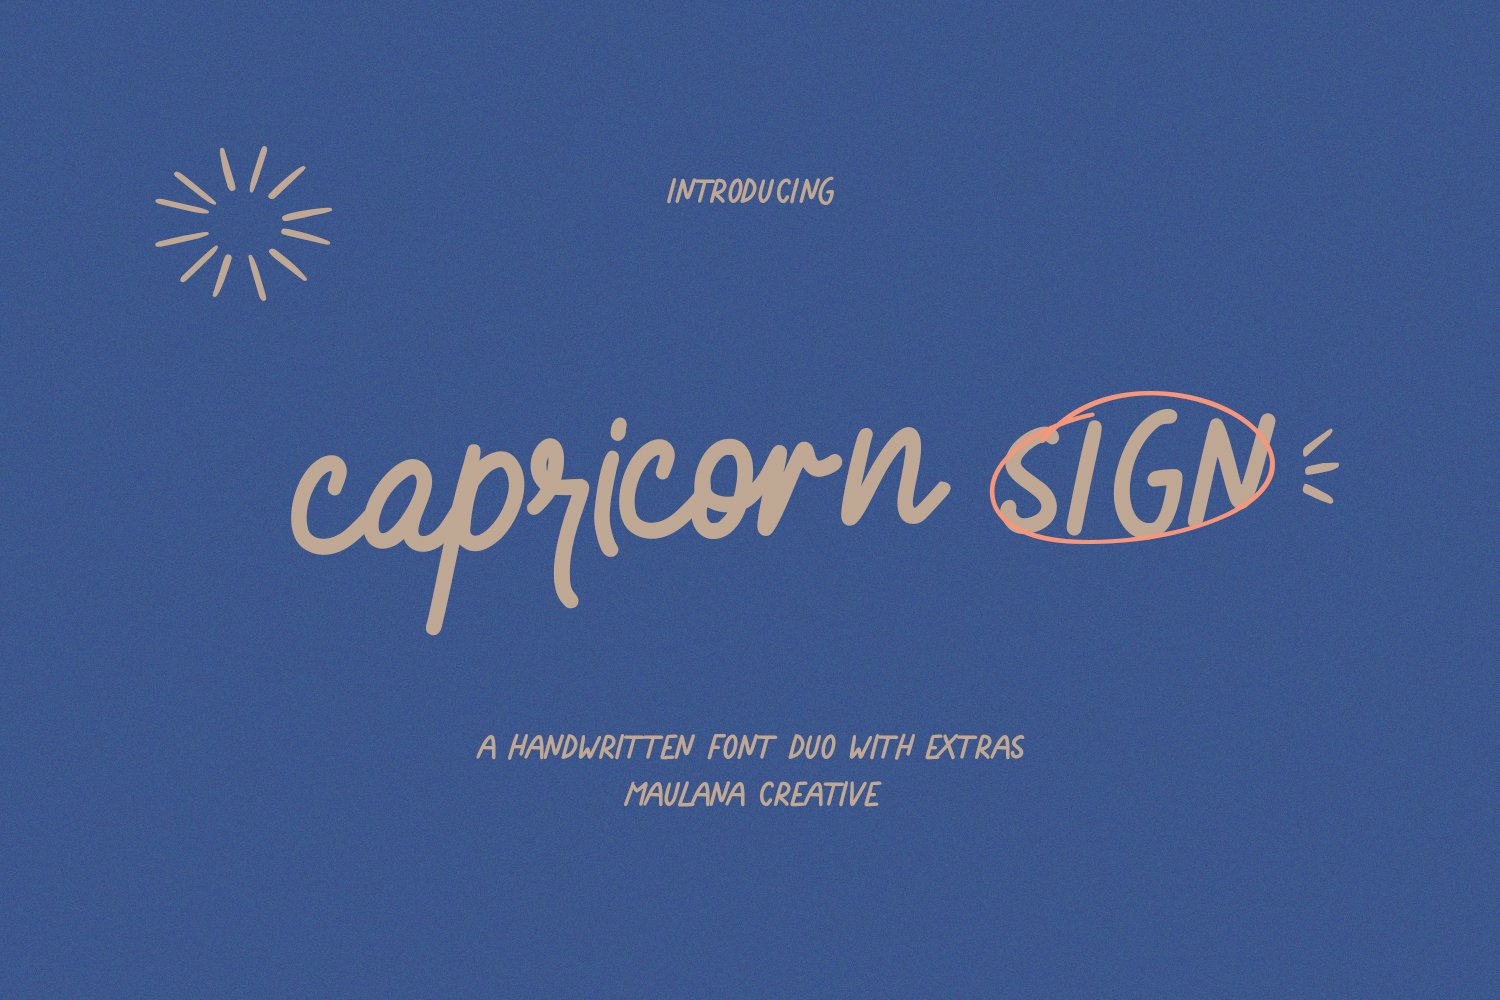 Capricorn Sign Handwritten Font Duo cover image.